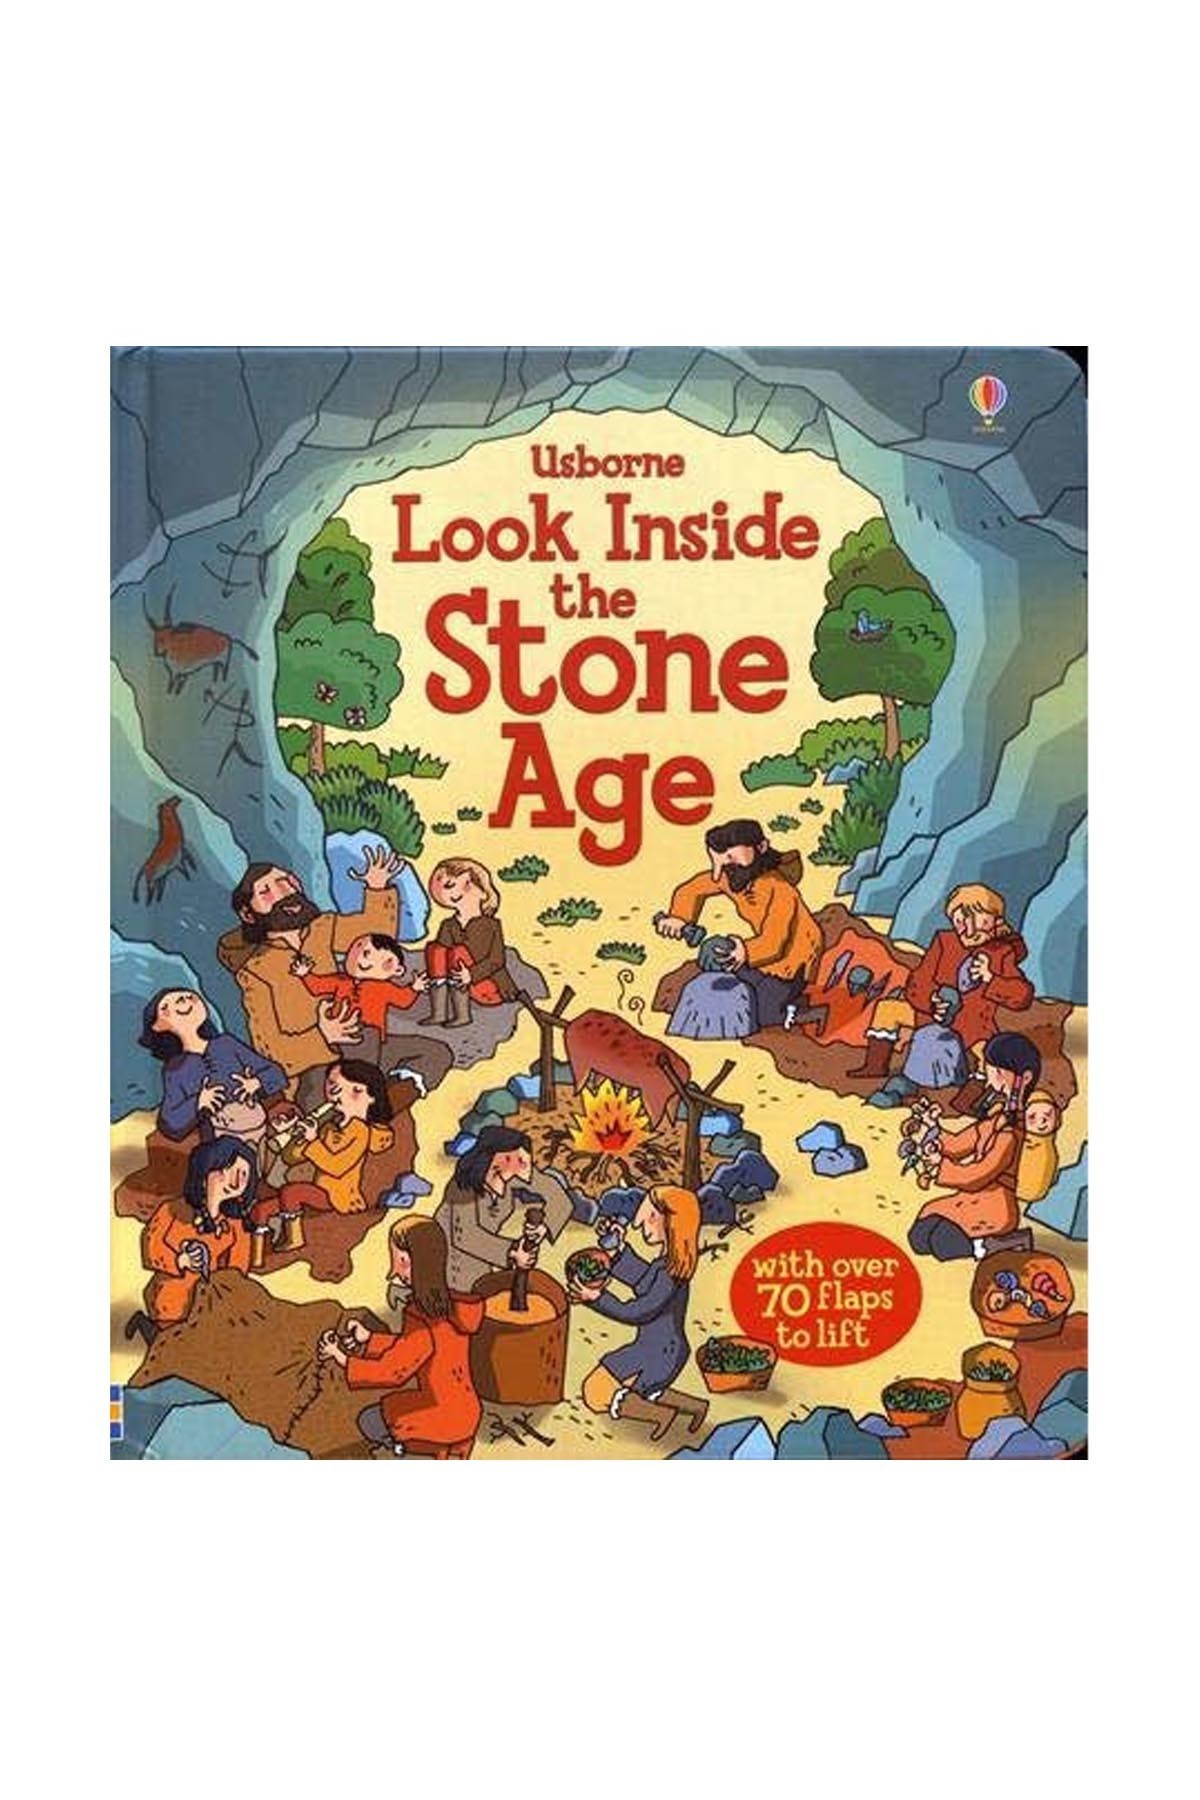 The Usborne Look Inside The Stone Age